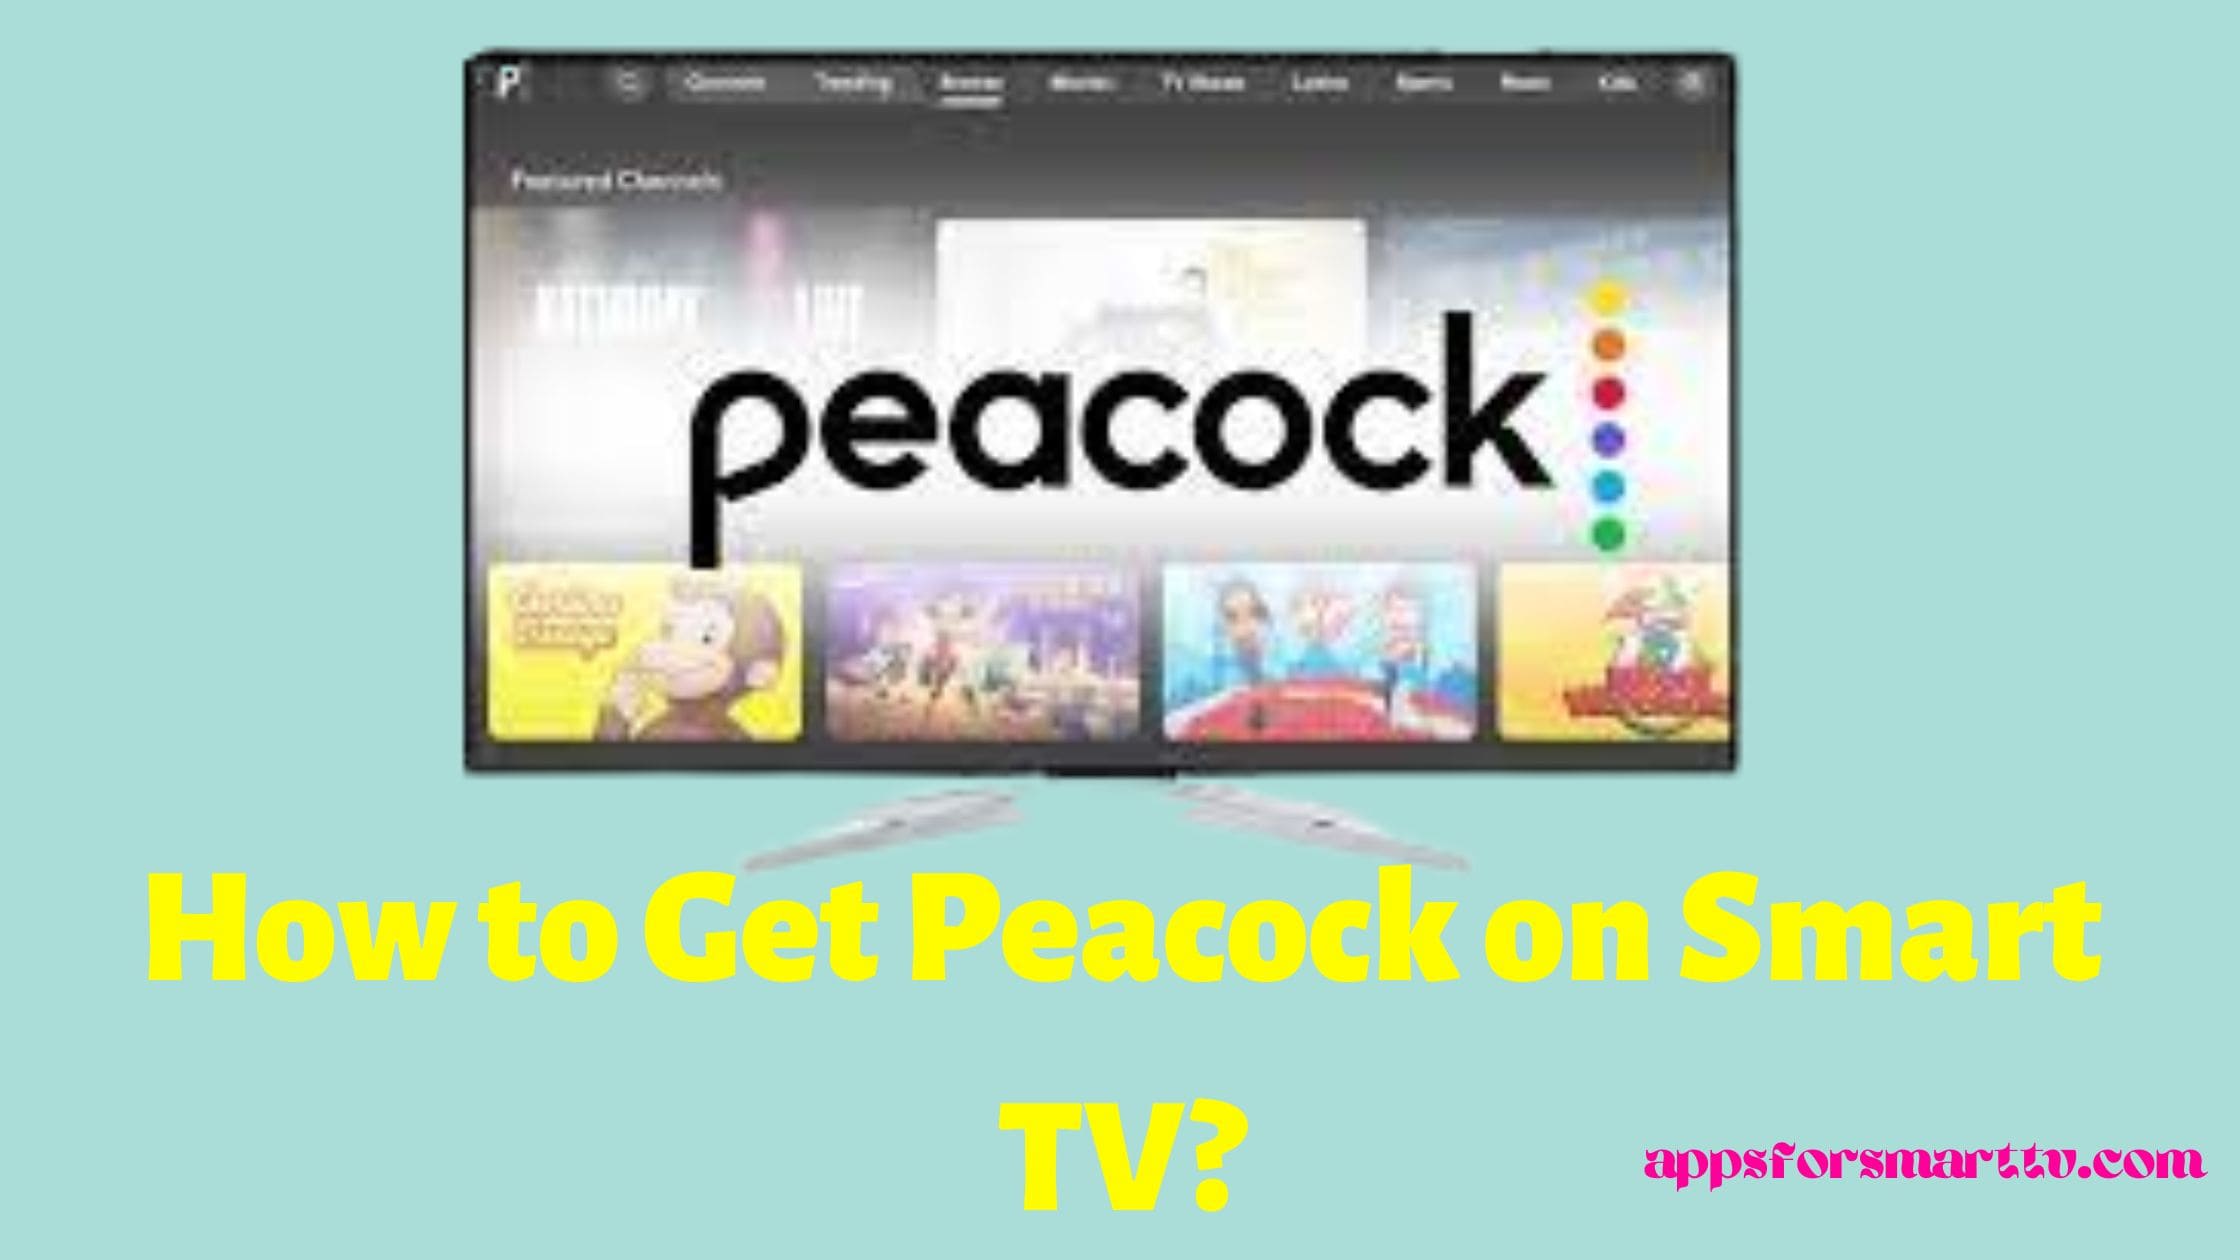 How to get Peacock on Smart TV?